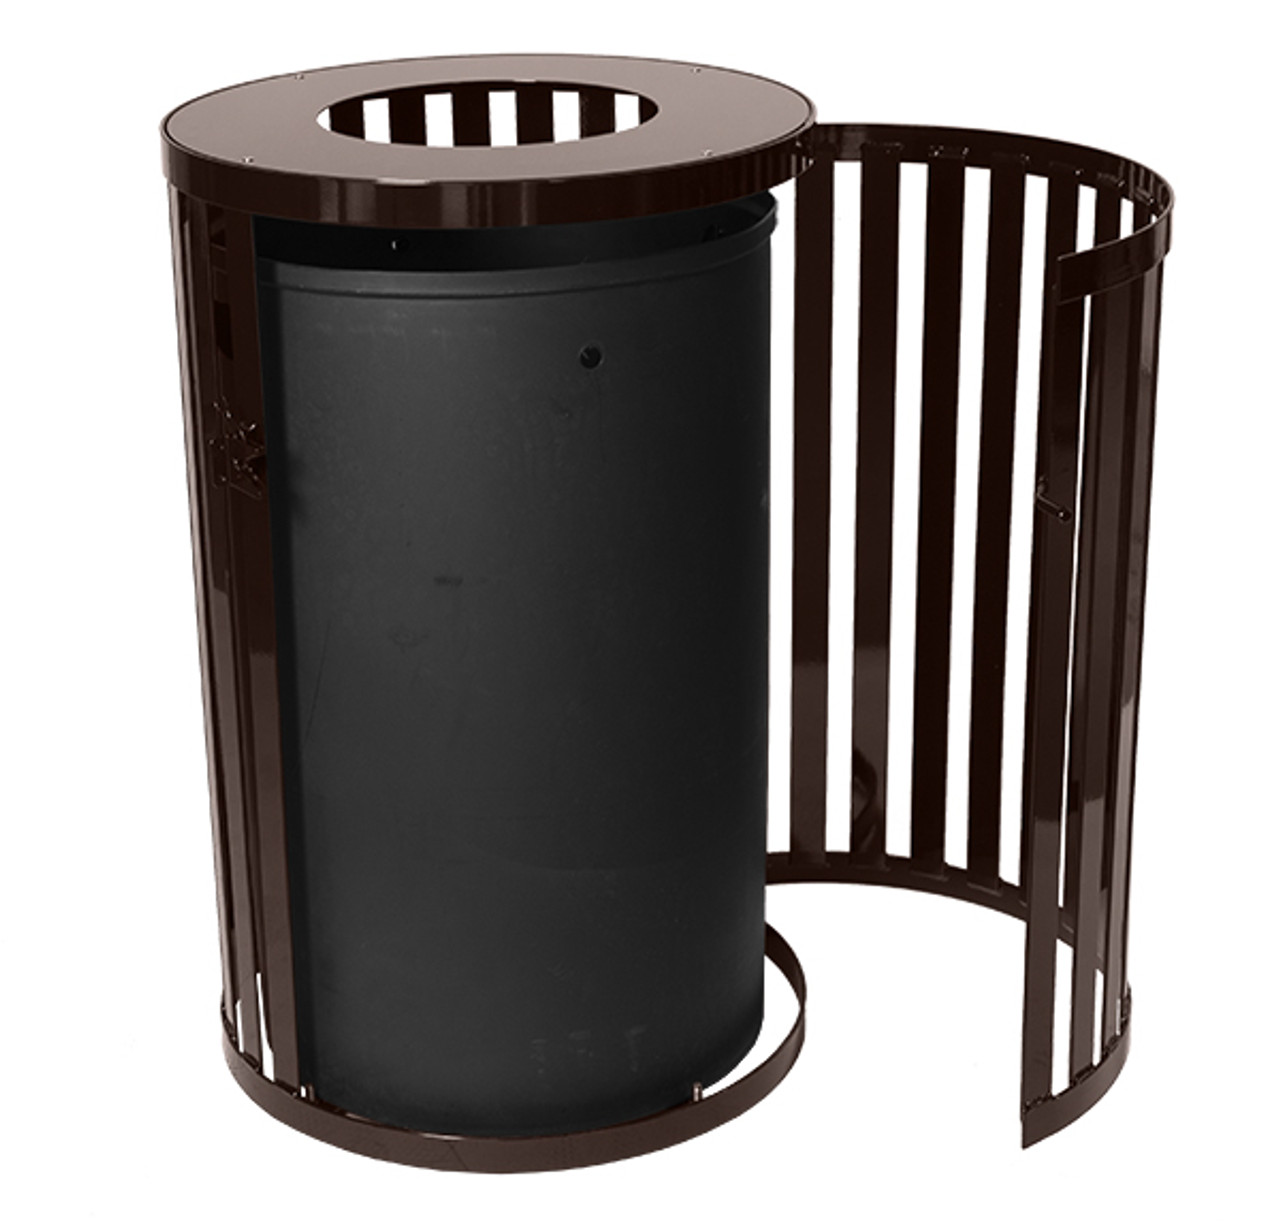 South Hampton 45 Gallon SCTP-40 COF Flat Steel Trash Can with Gate BROWN